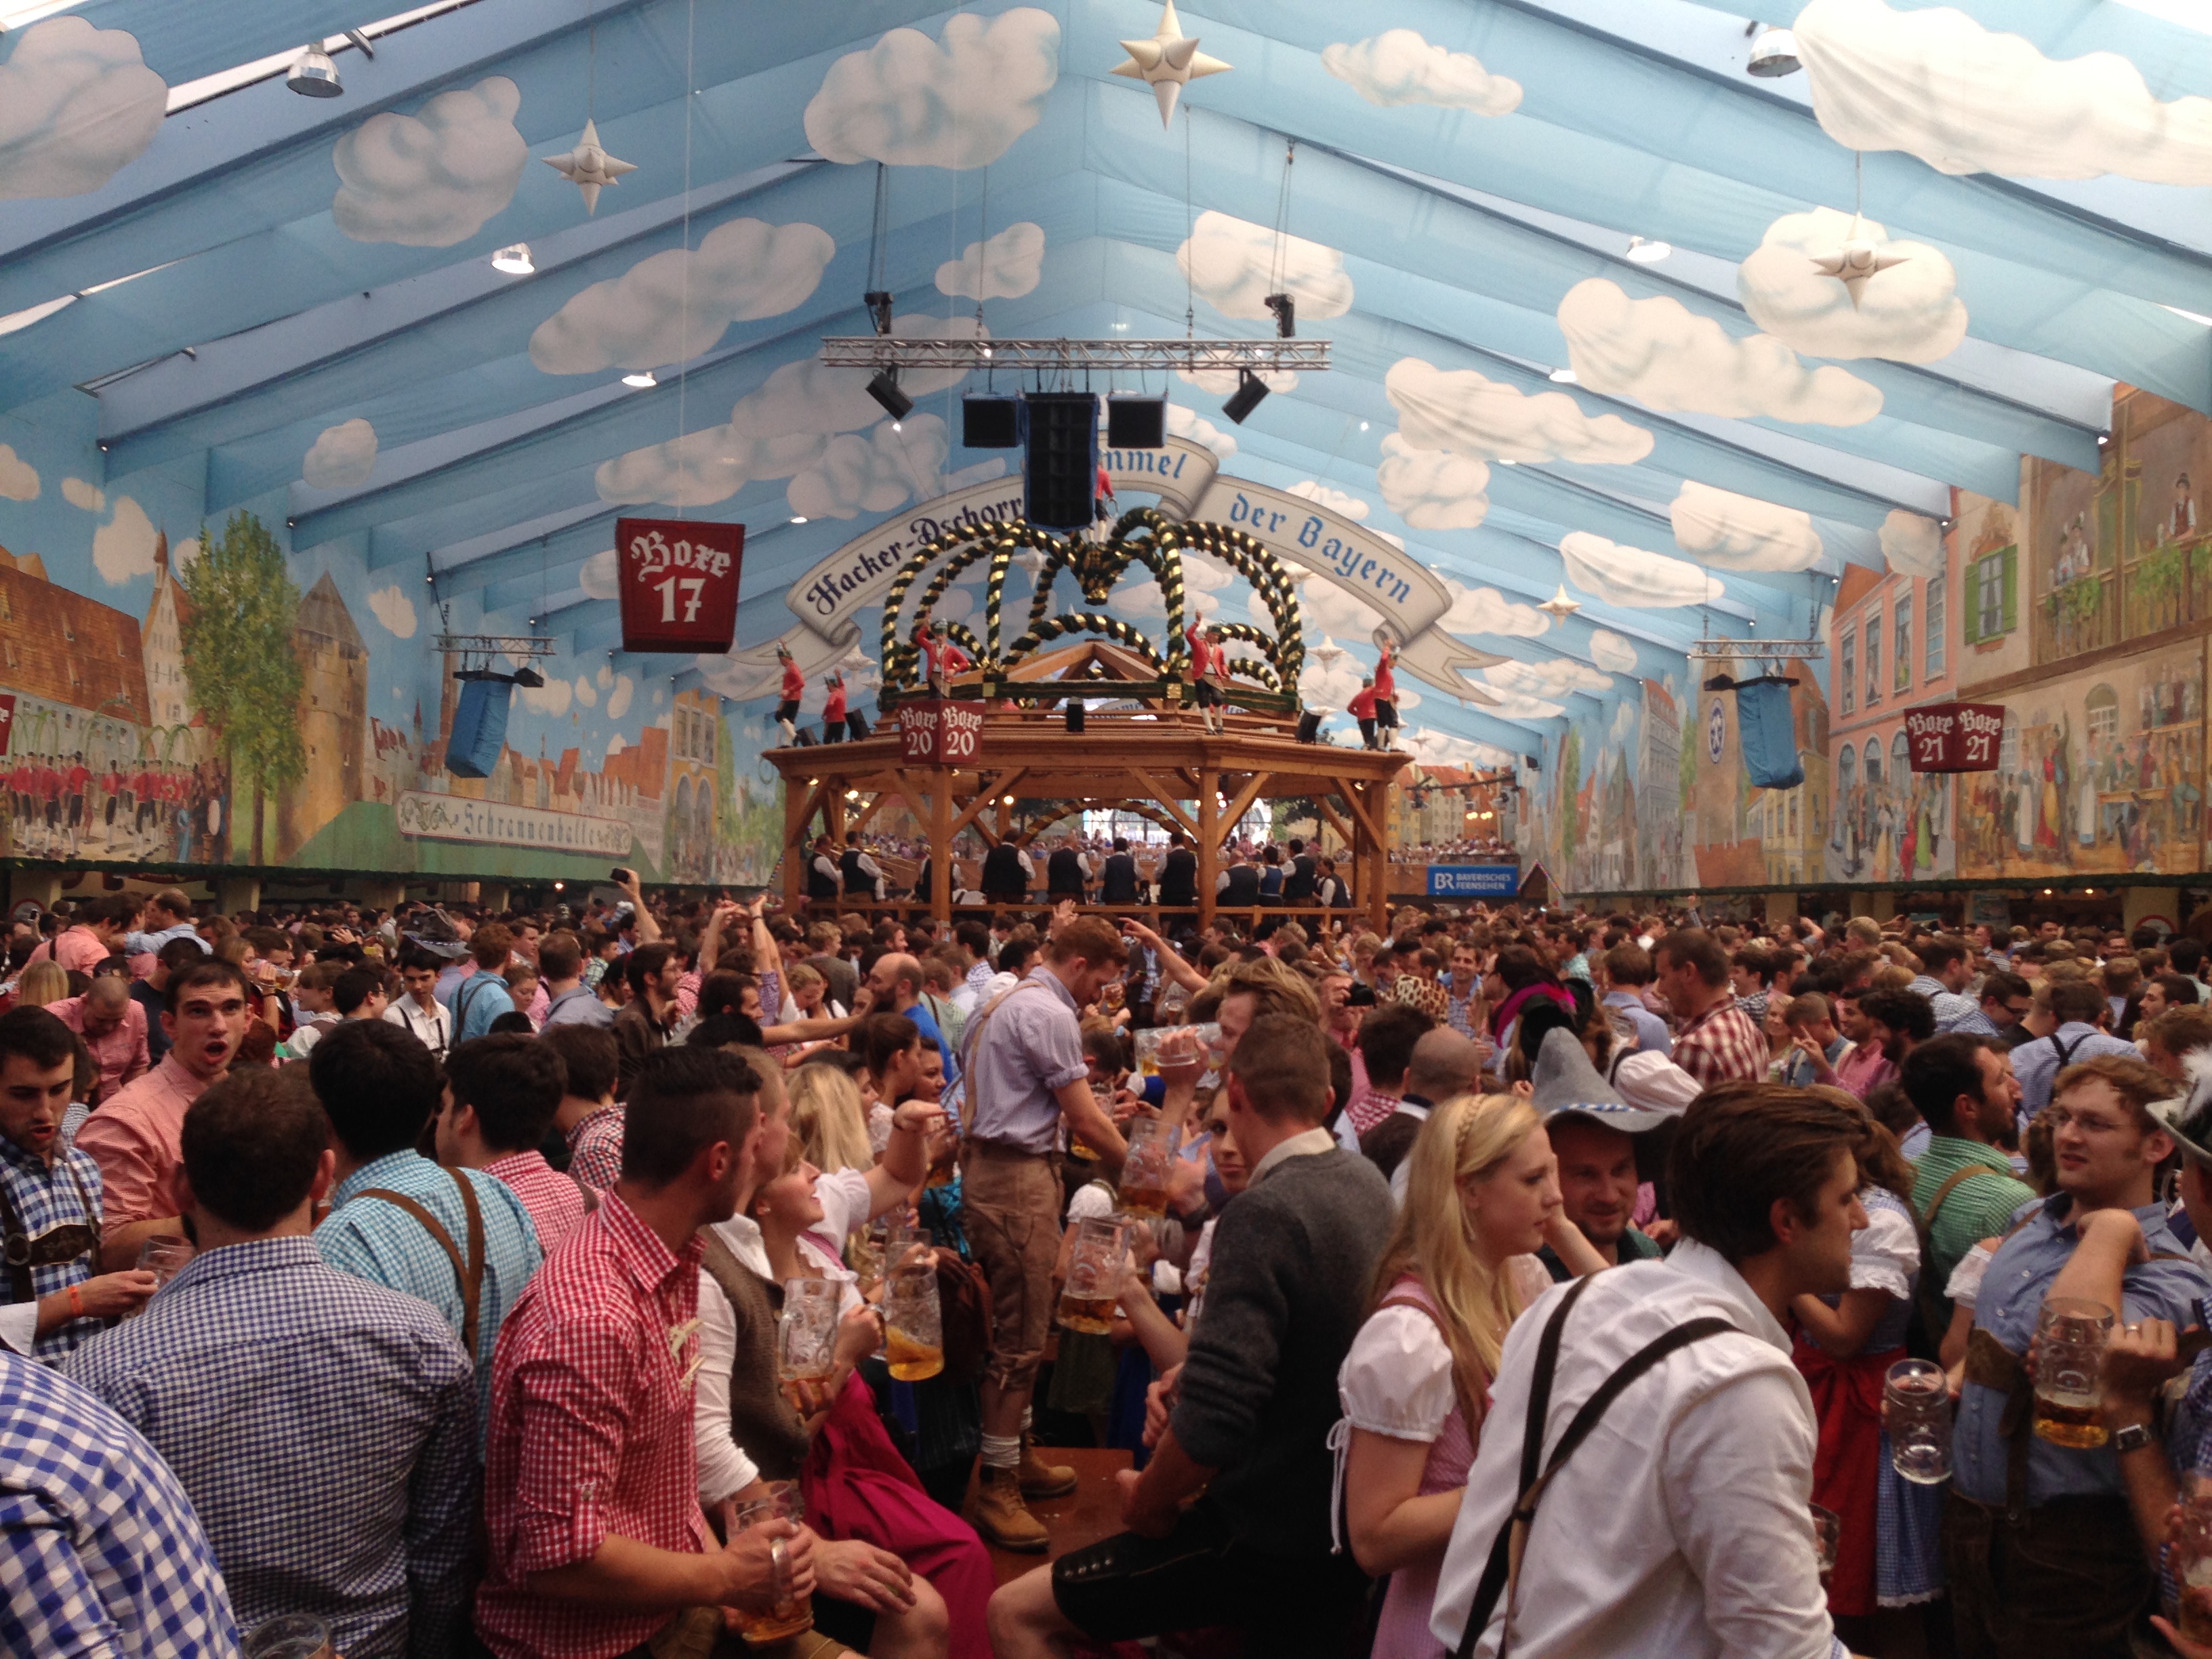 a large crowd of people in a tent